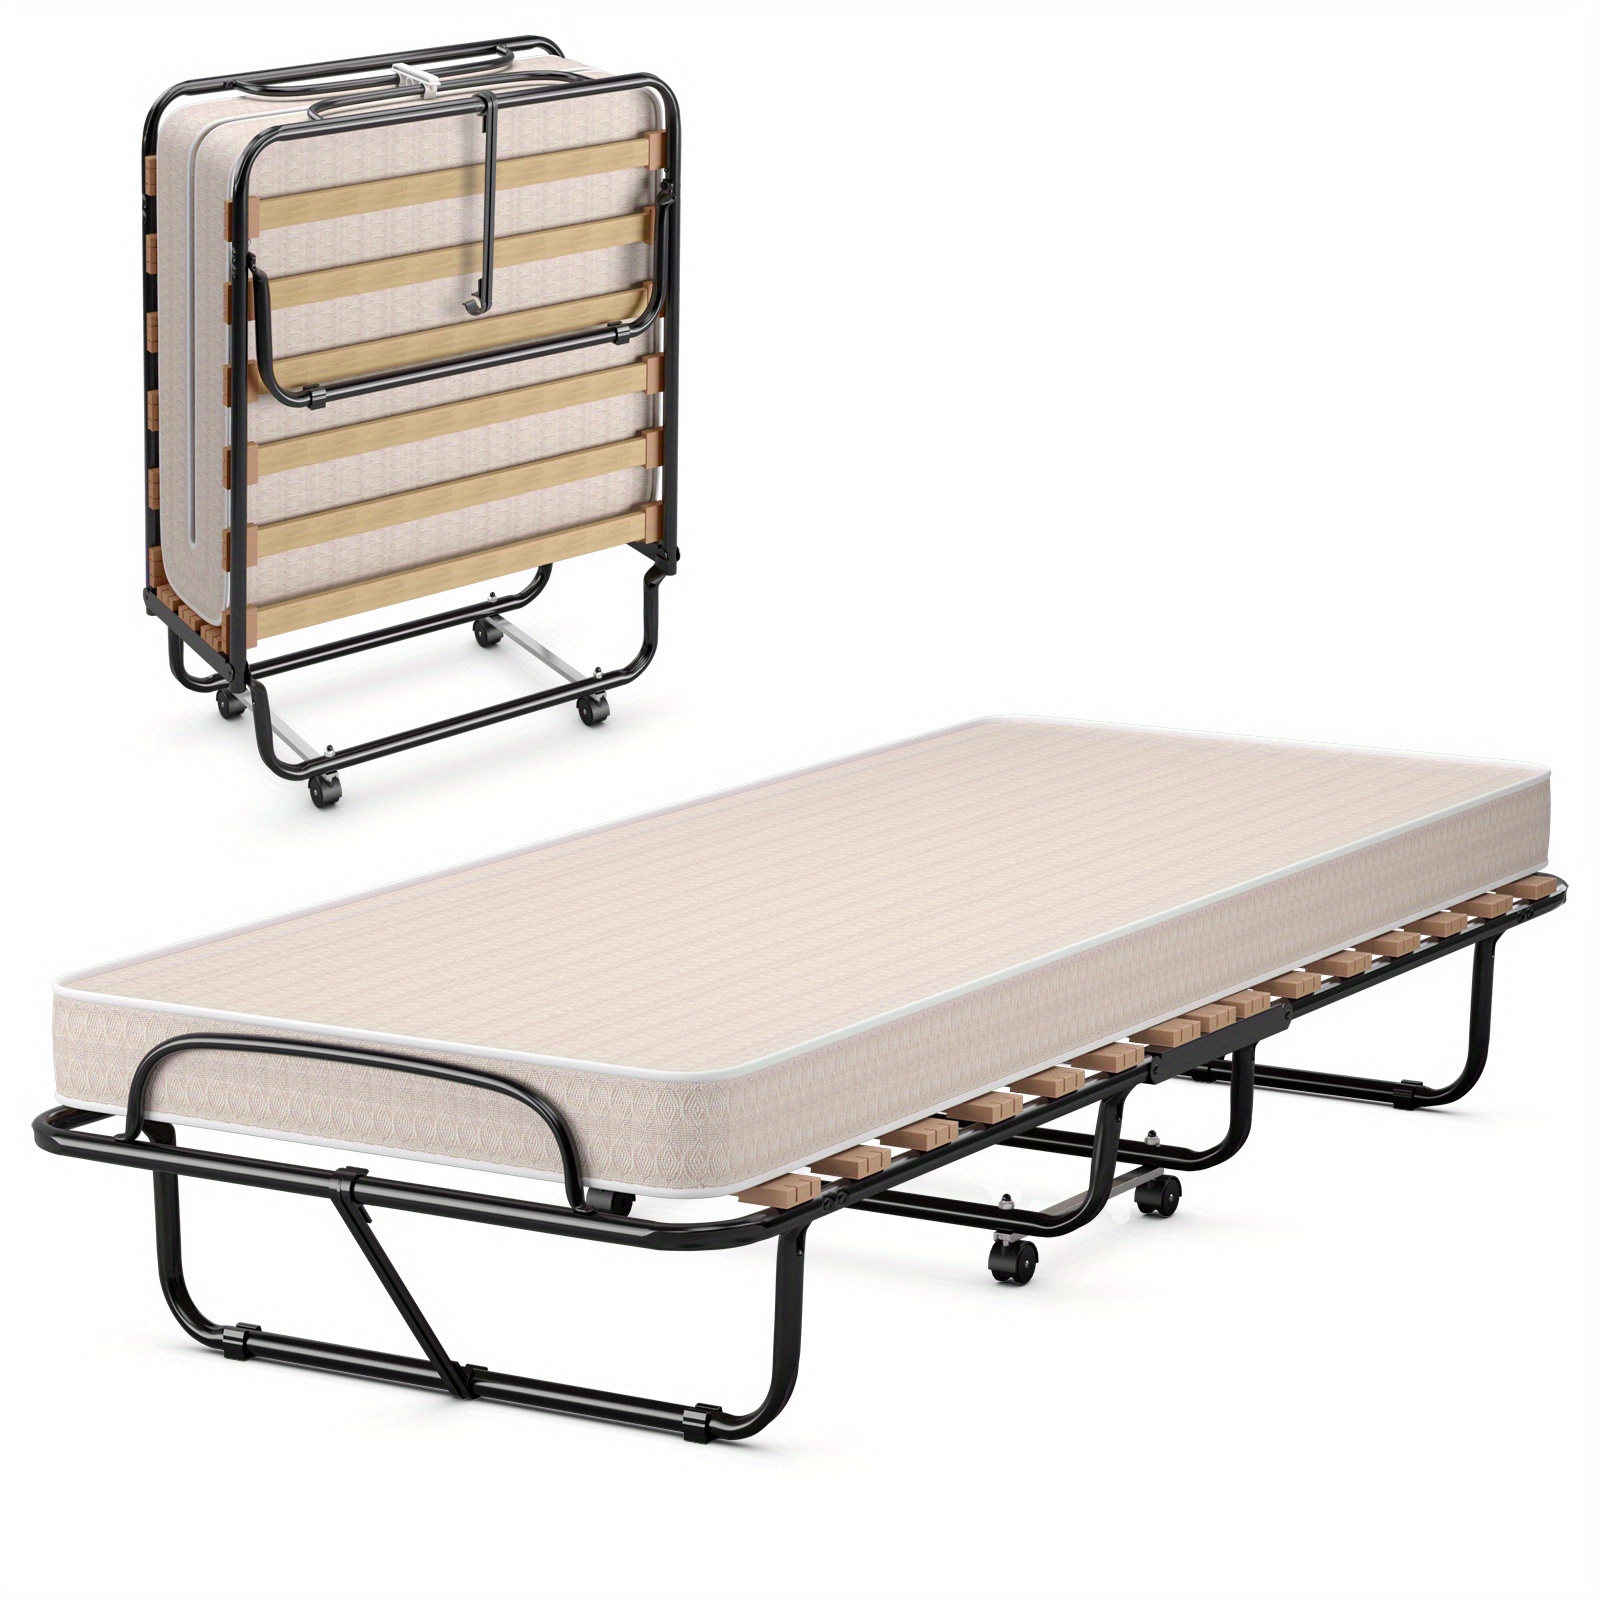 

Costway Portable Folding Bed With Memory Foam Mattress Rollaway Cot Made In Italy